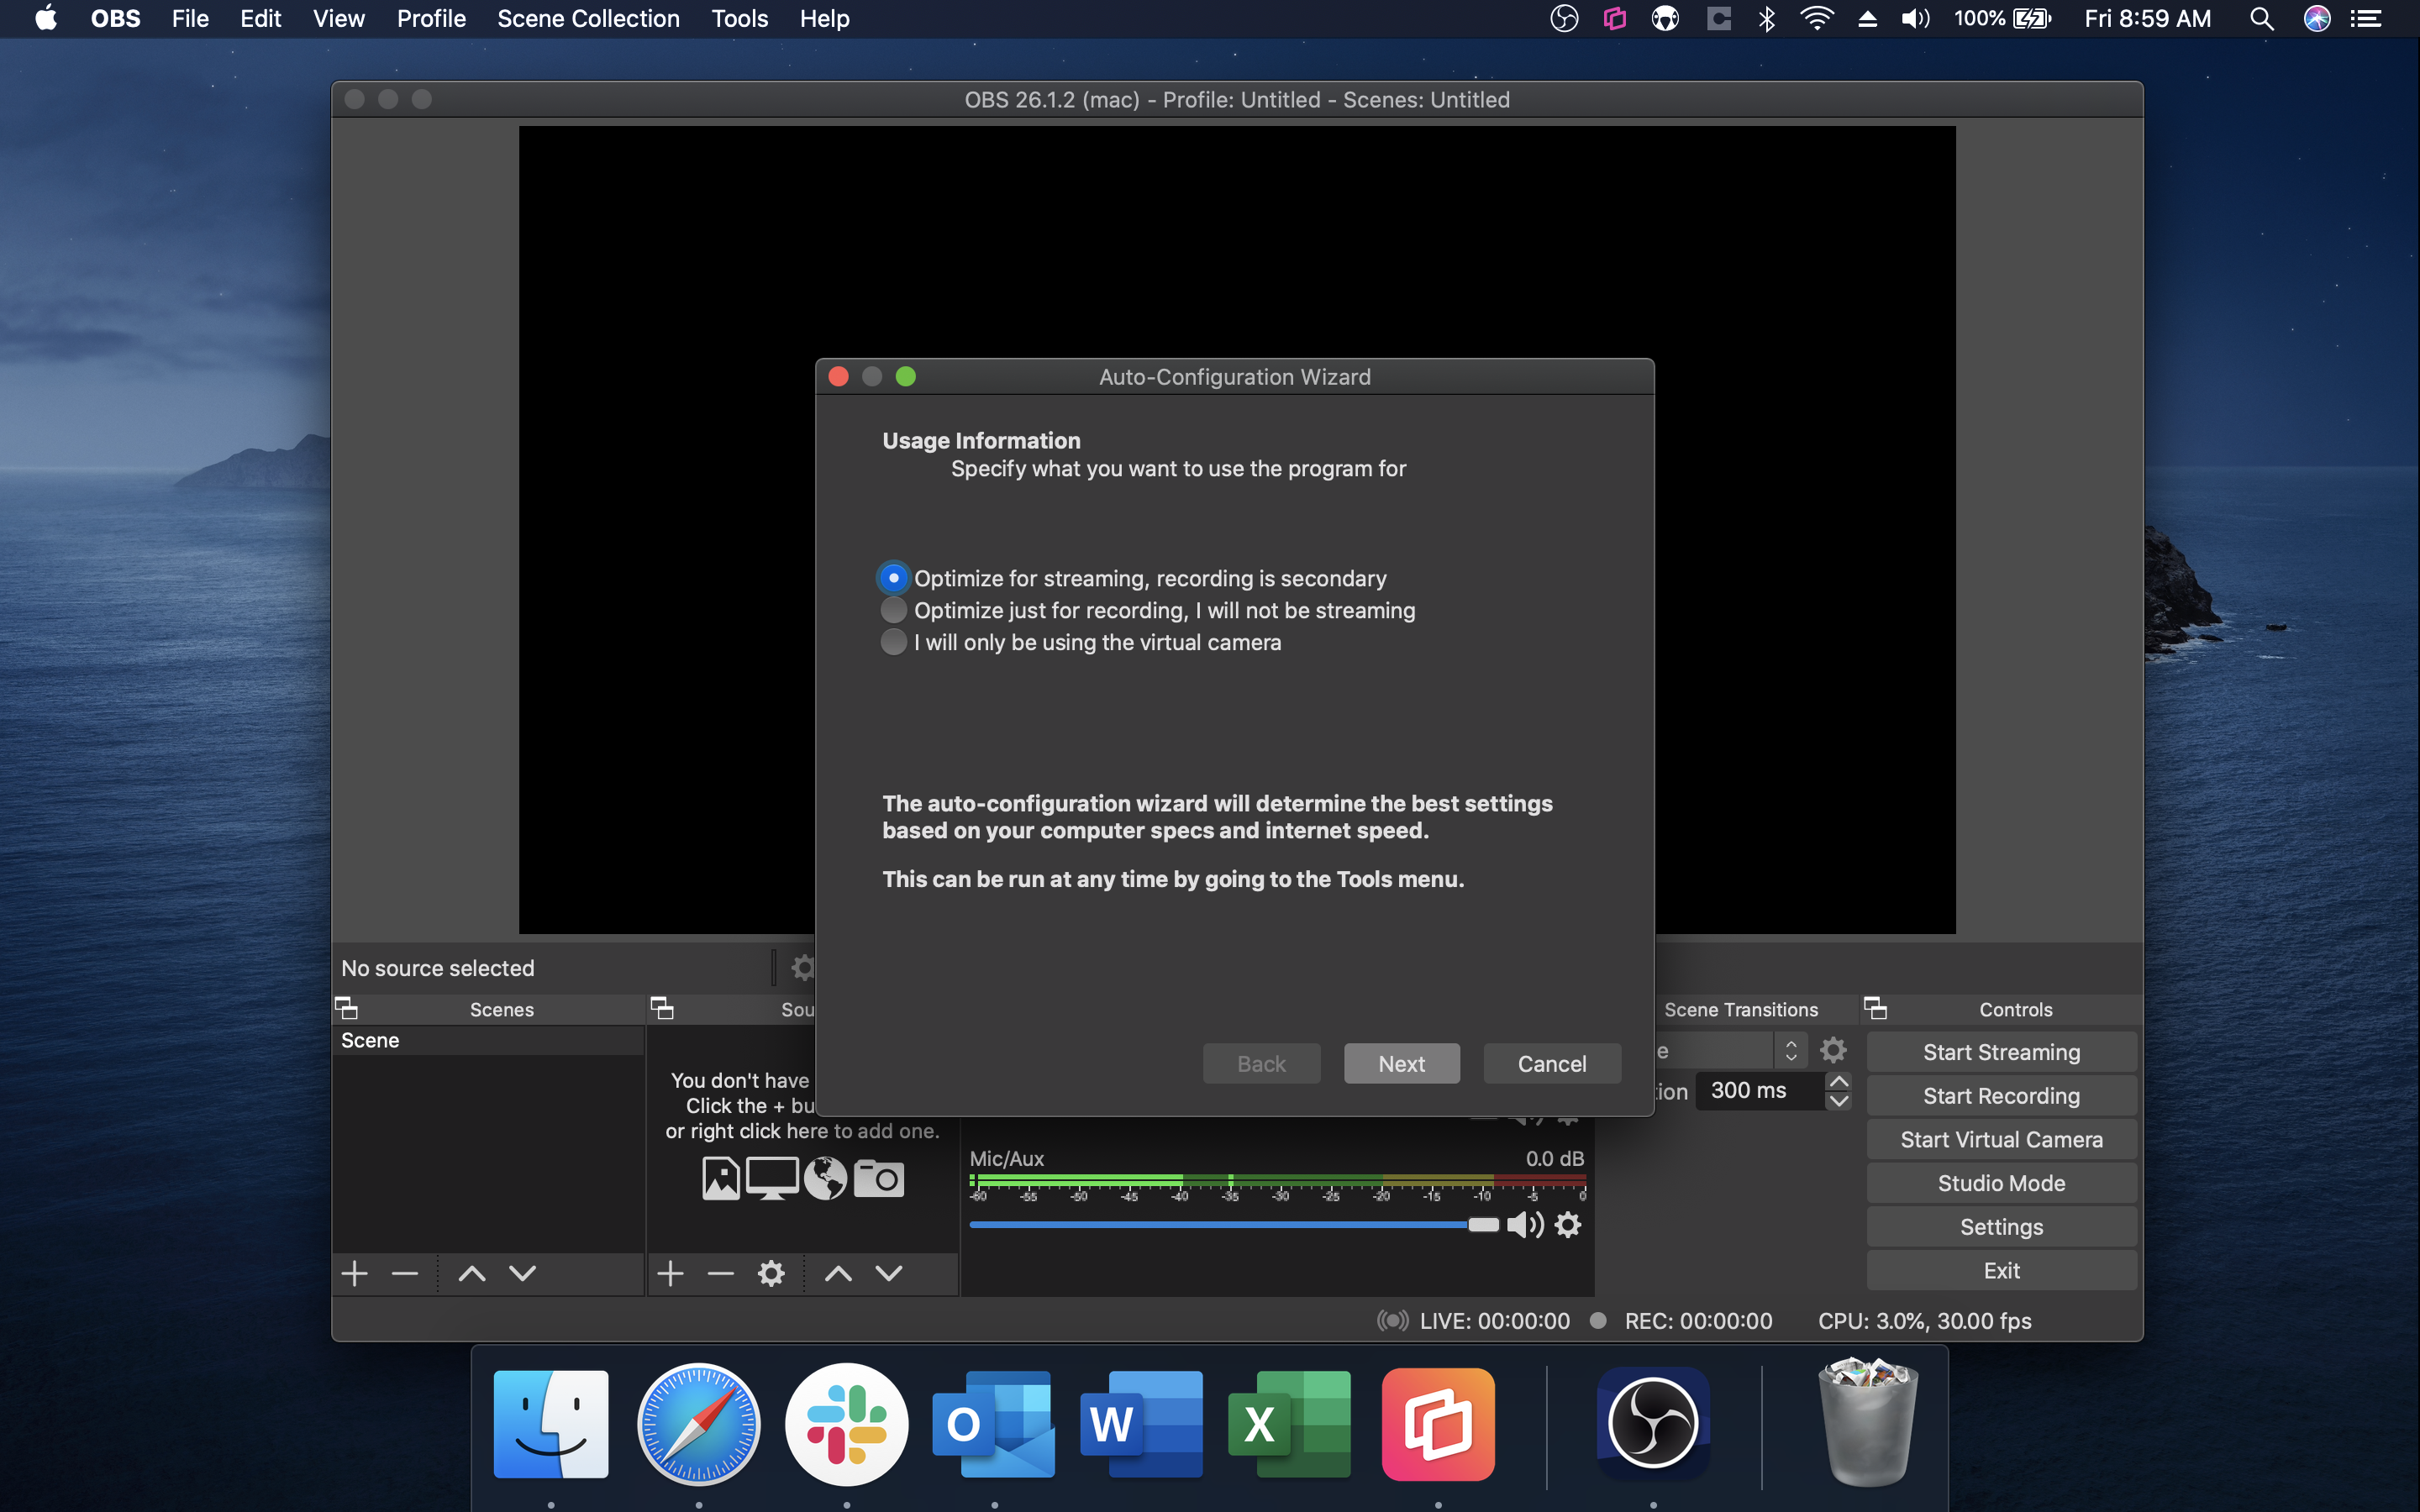 how to connect obs to twitch step by step